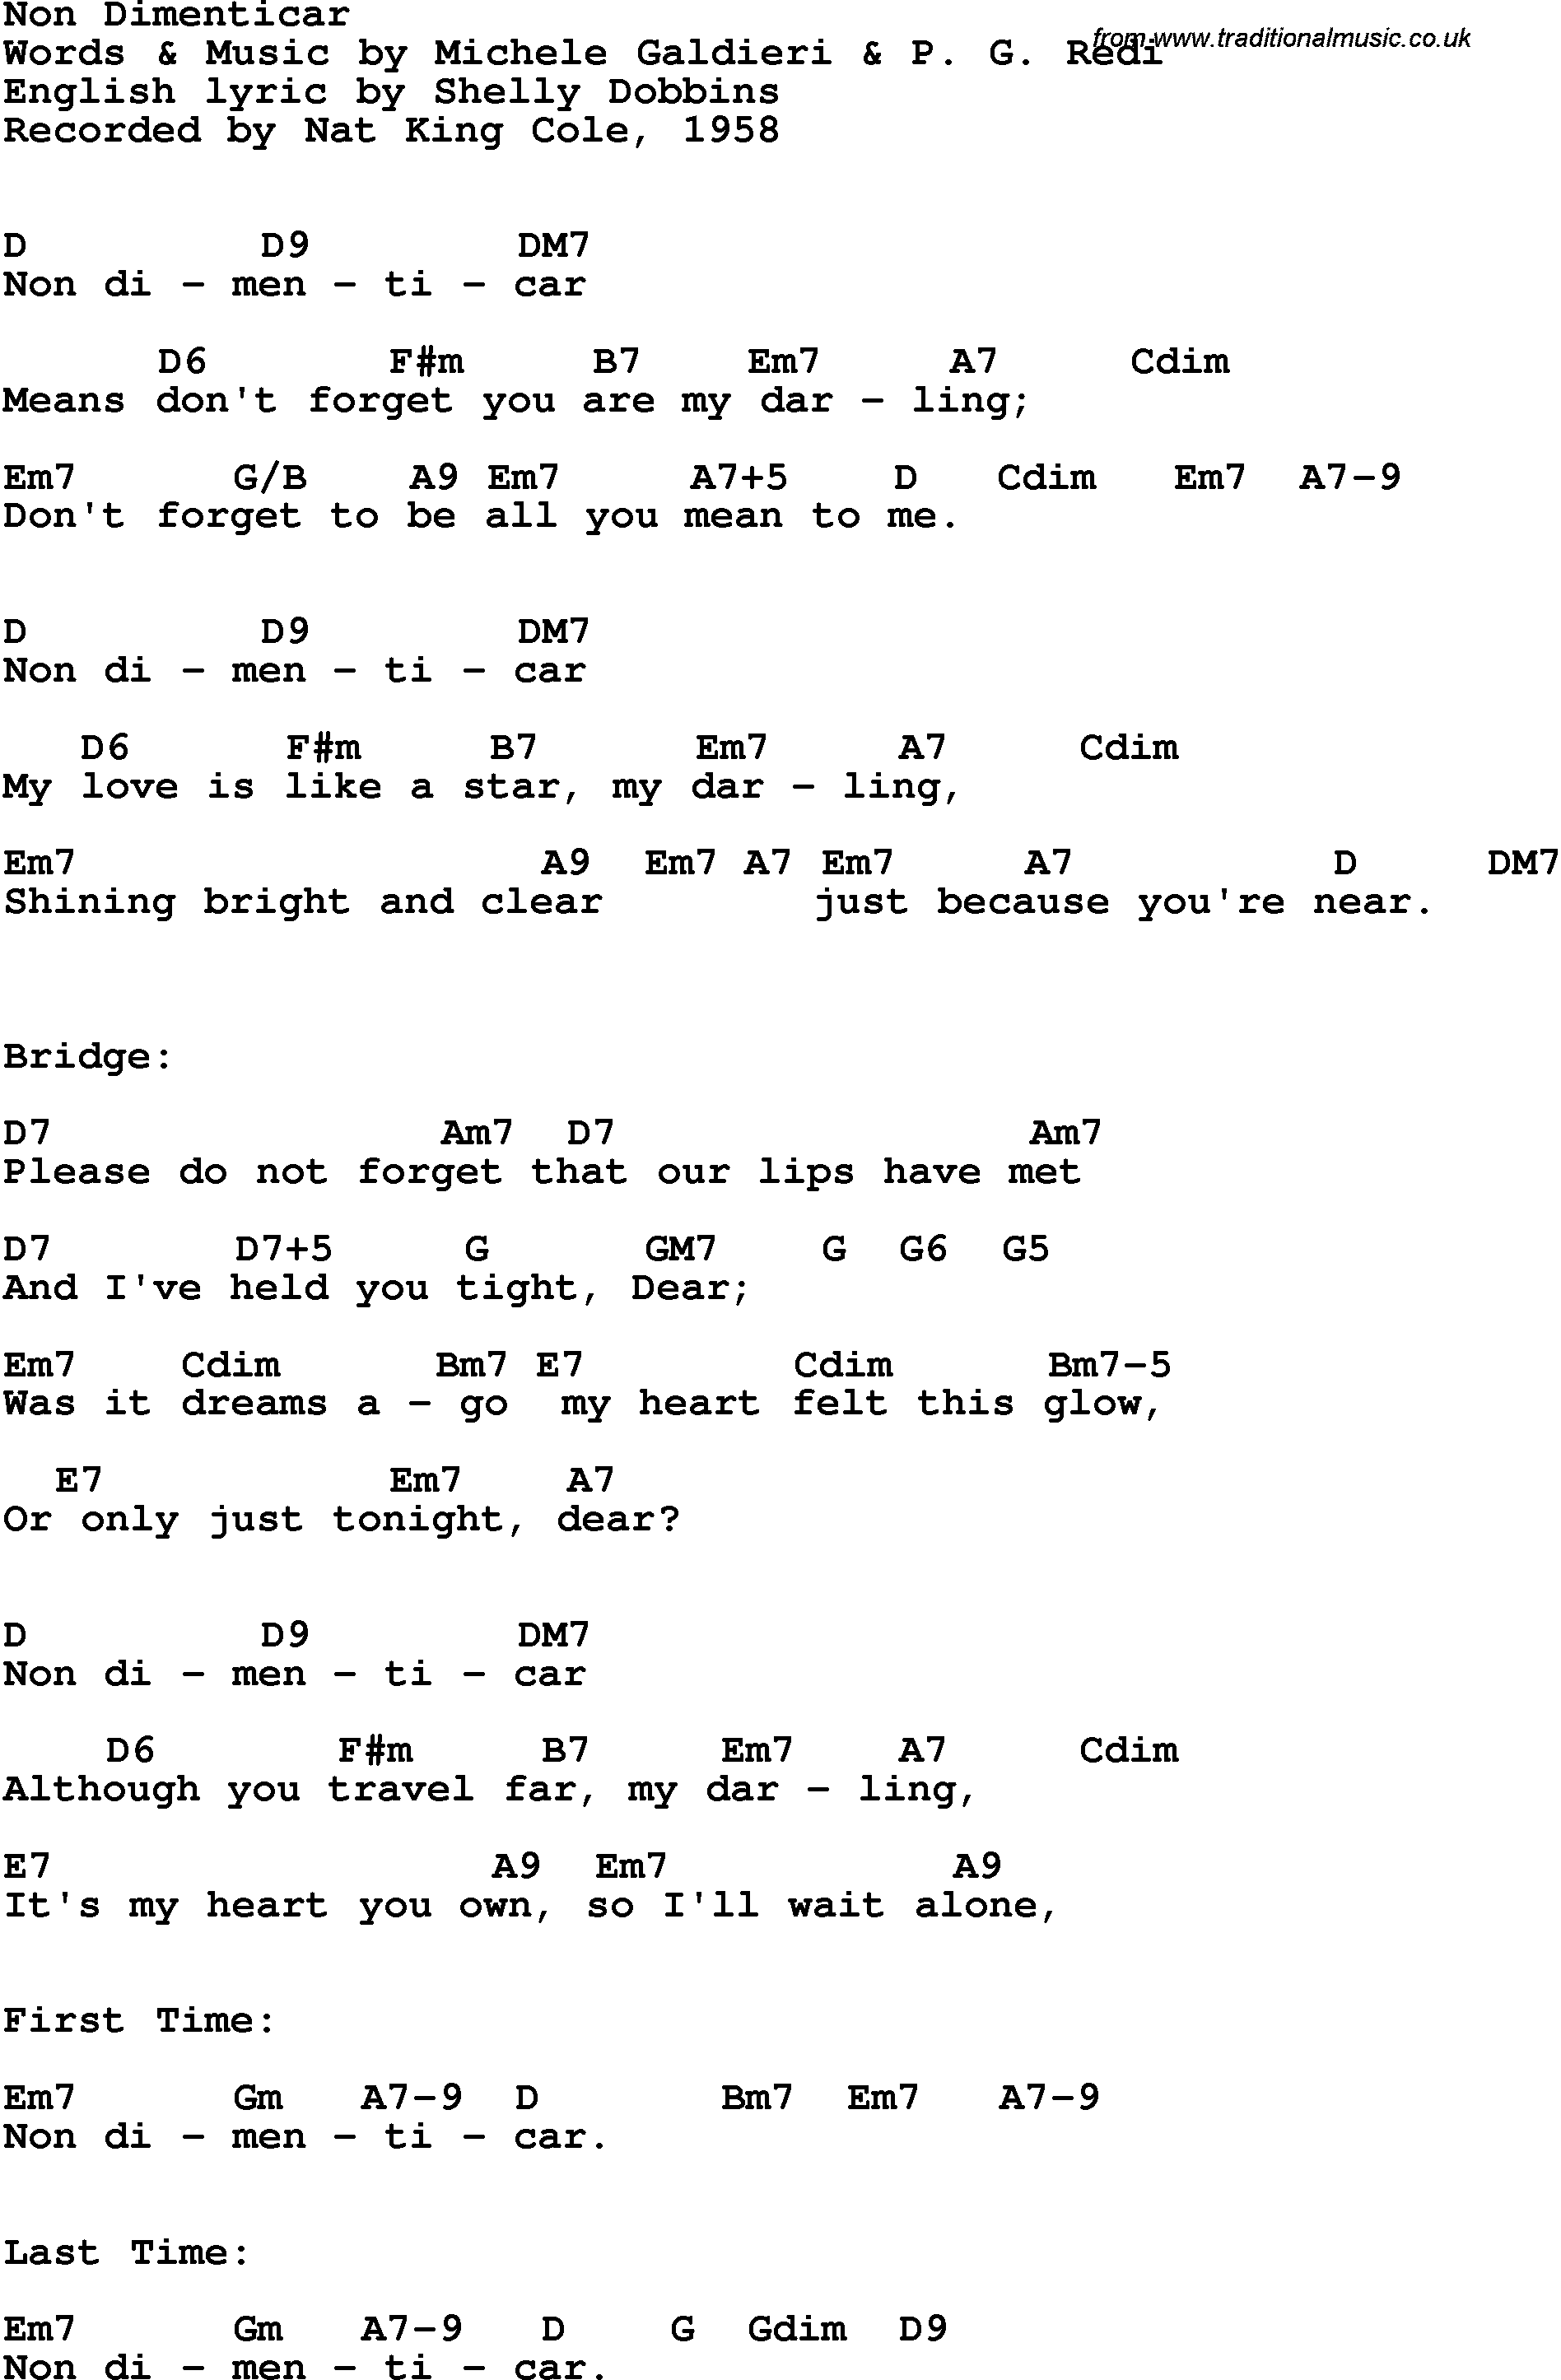 Song Lyrics with guitar chords for Non Dimenticar - Nat King Cole, 1958